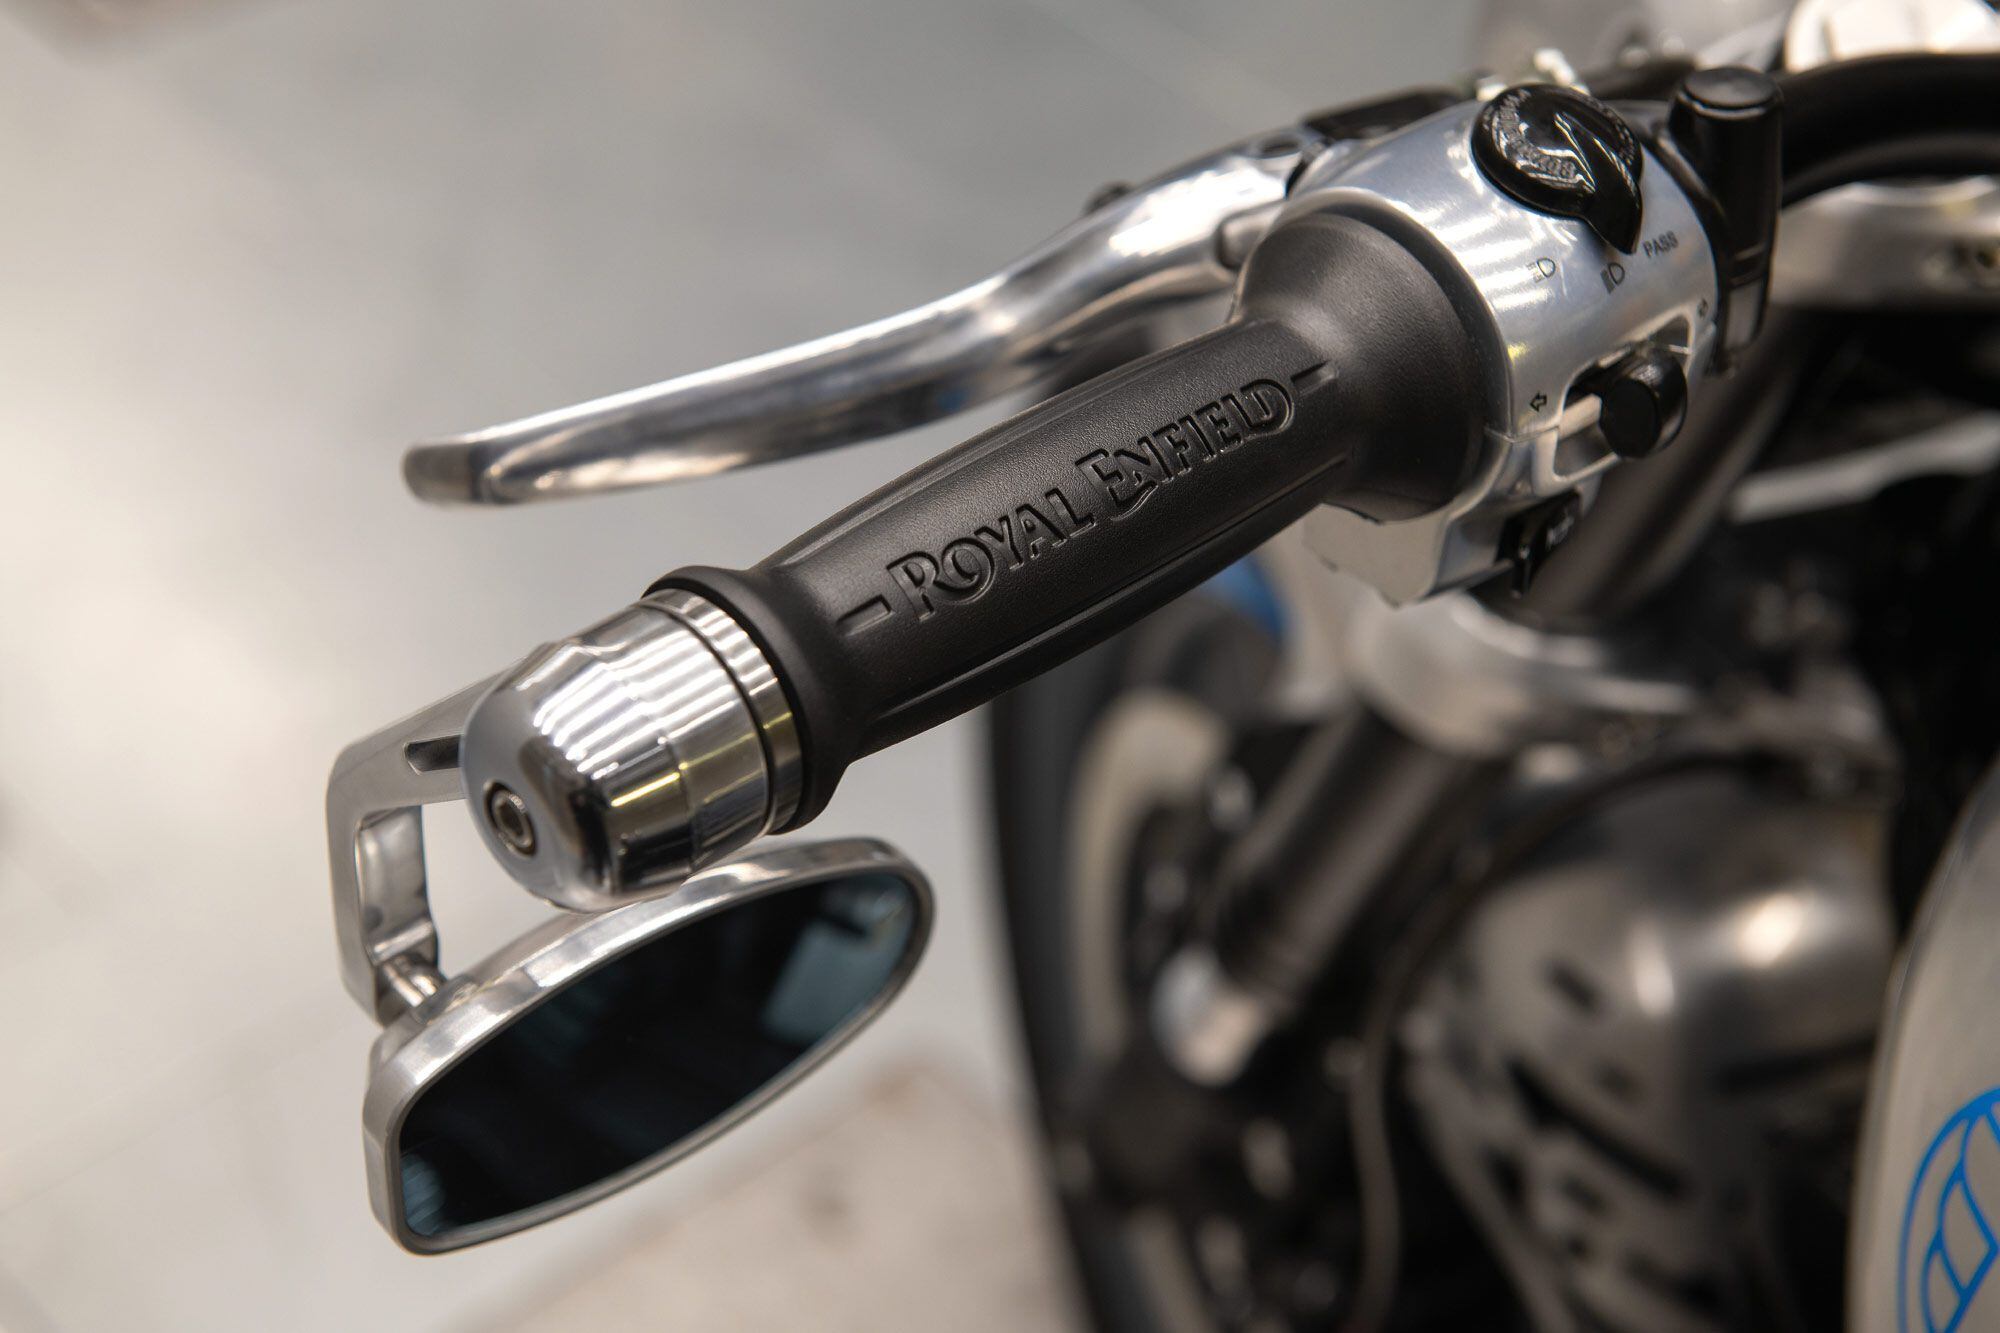 Dropped mirrors add a little cafe racer flair to the SG650’s cruiser vibe.